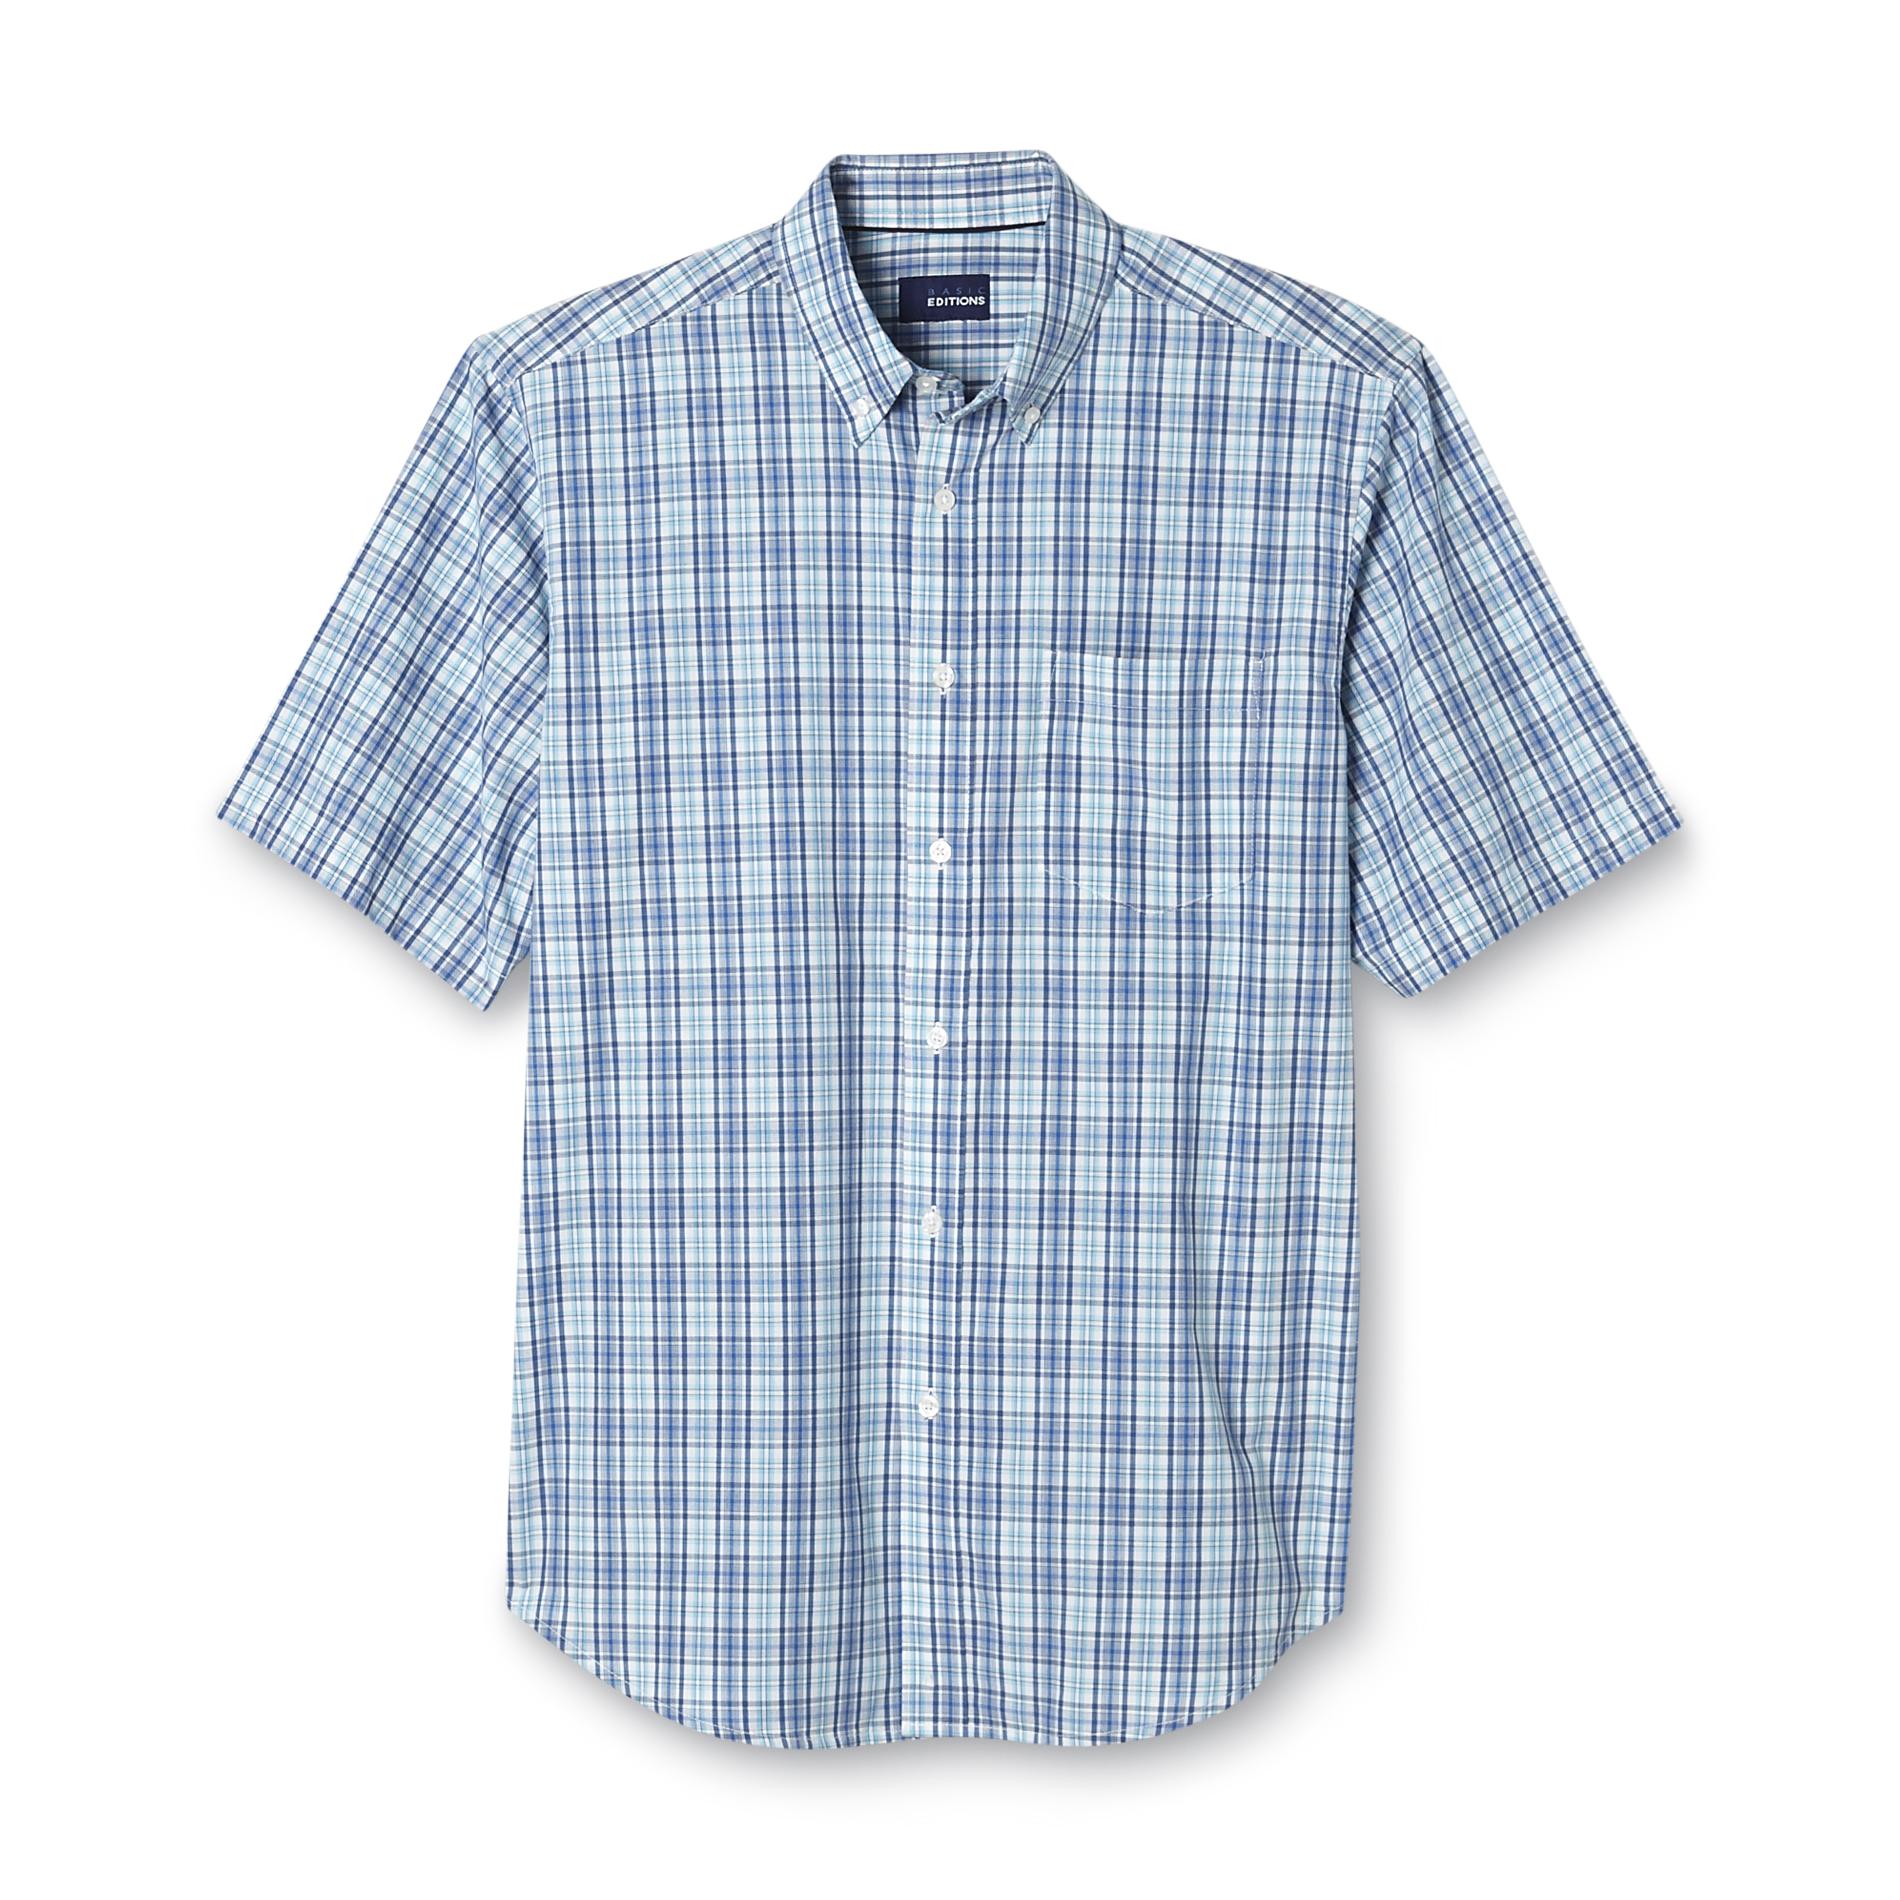 Basic Editions Men's Easy Care Woven Shirt - Grid Pattern